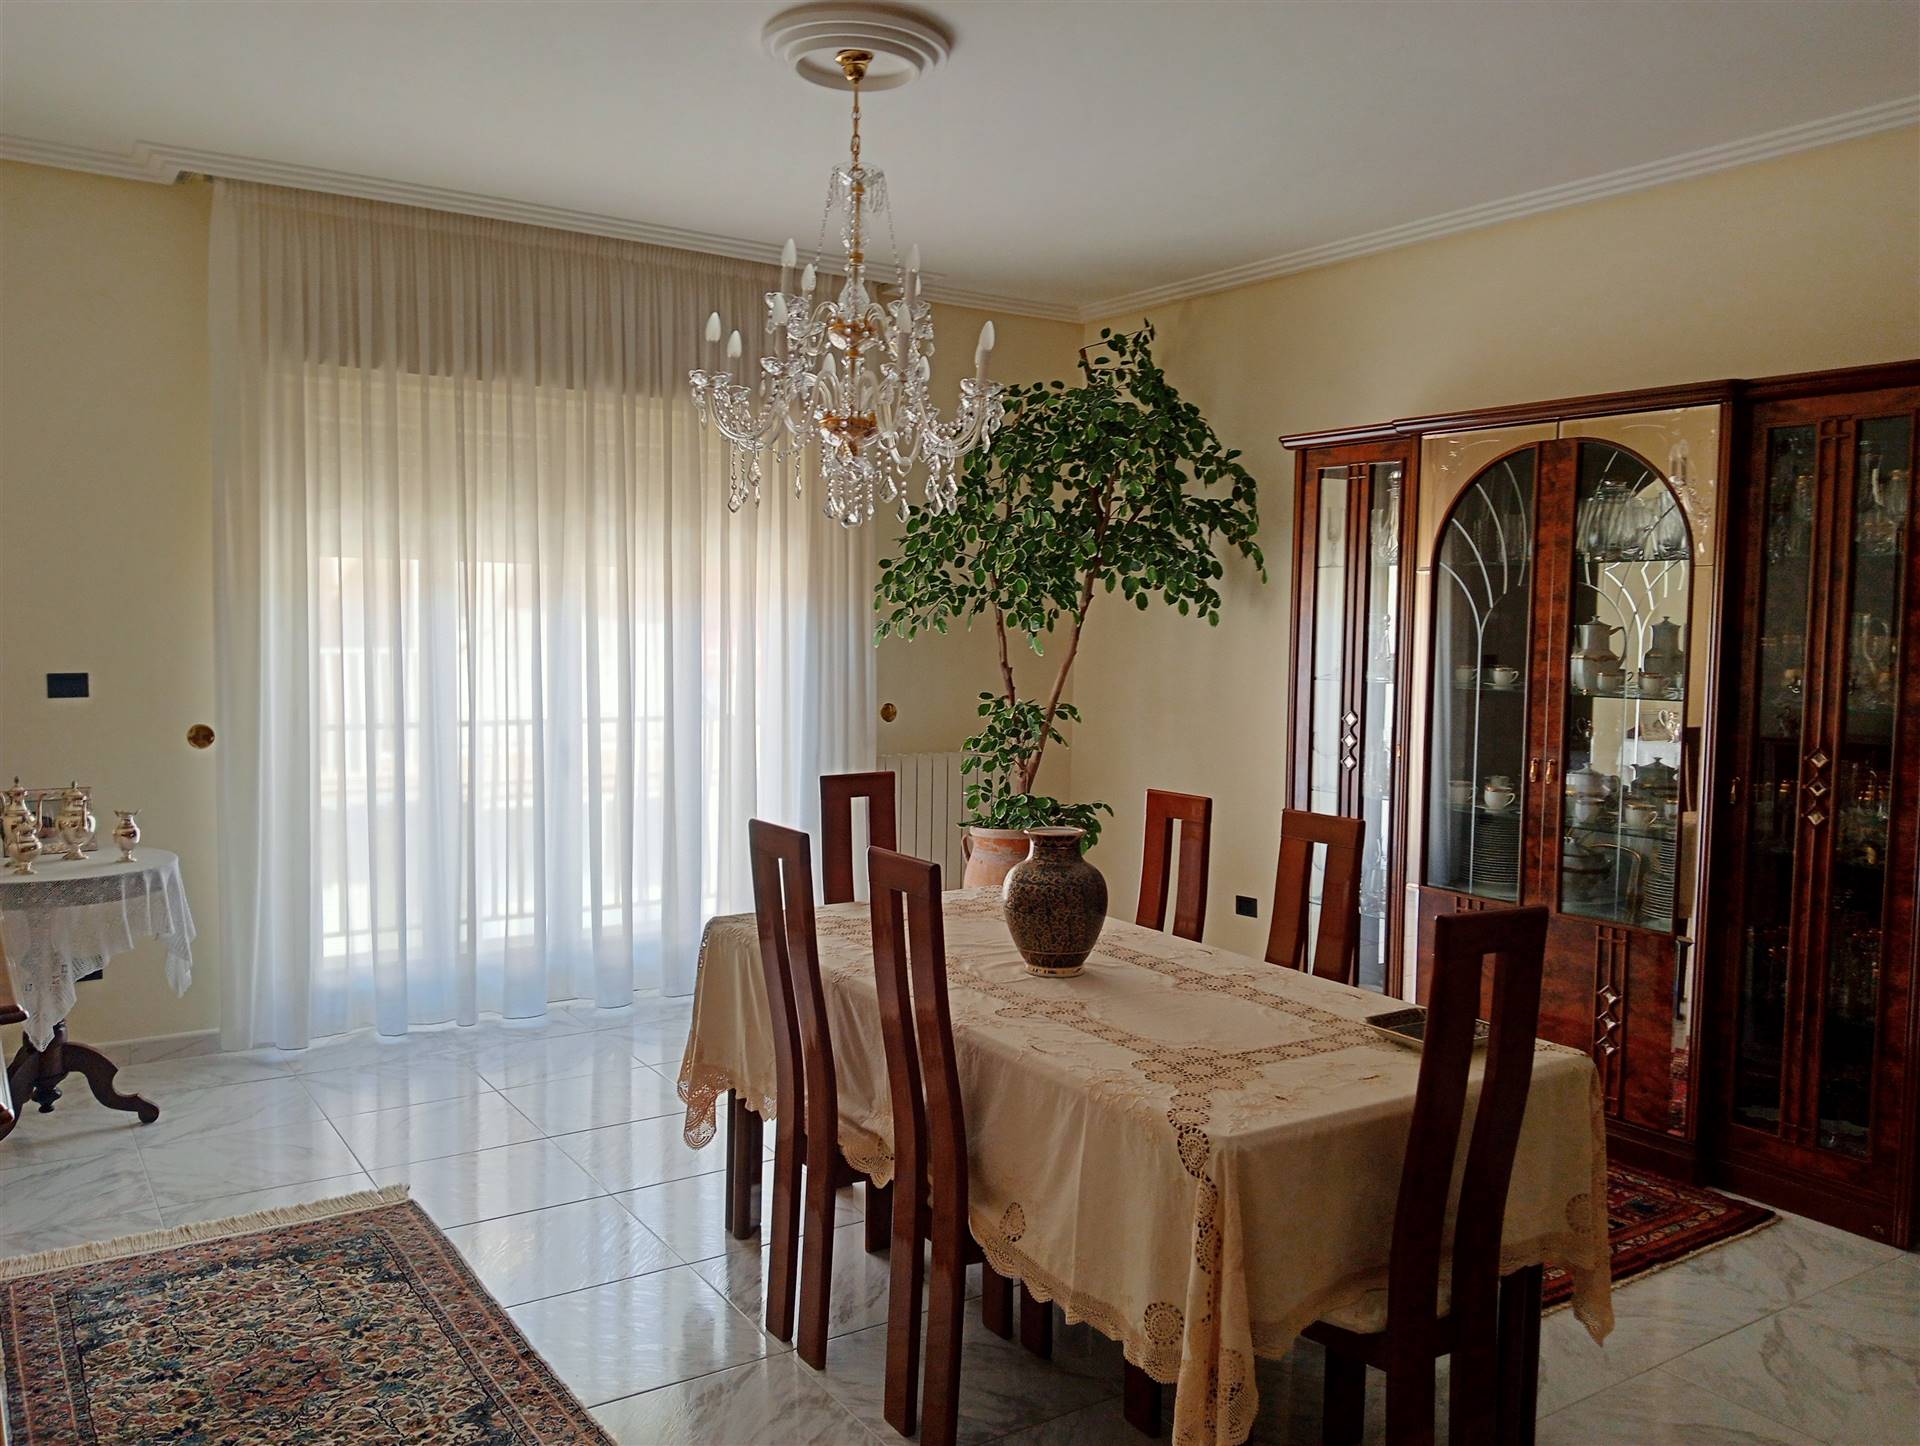 VIA SALSO, LICATA, Apartment for sale of 245 Sq. mt., Habitable, Heating Individual heating system, Energetic class: G, placed at 2°, composed by: 6 